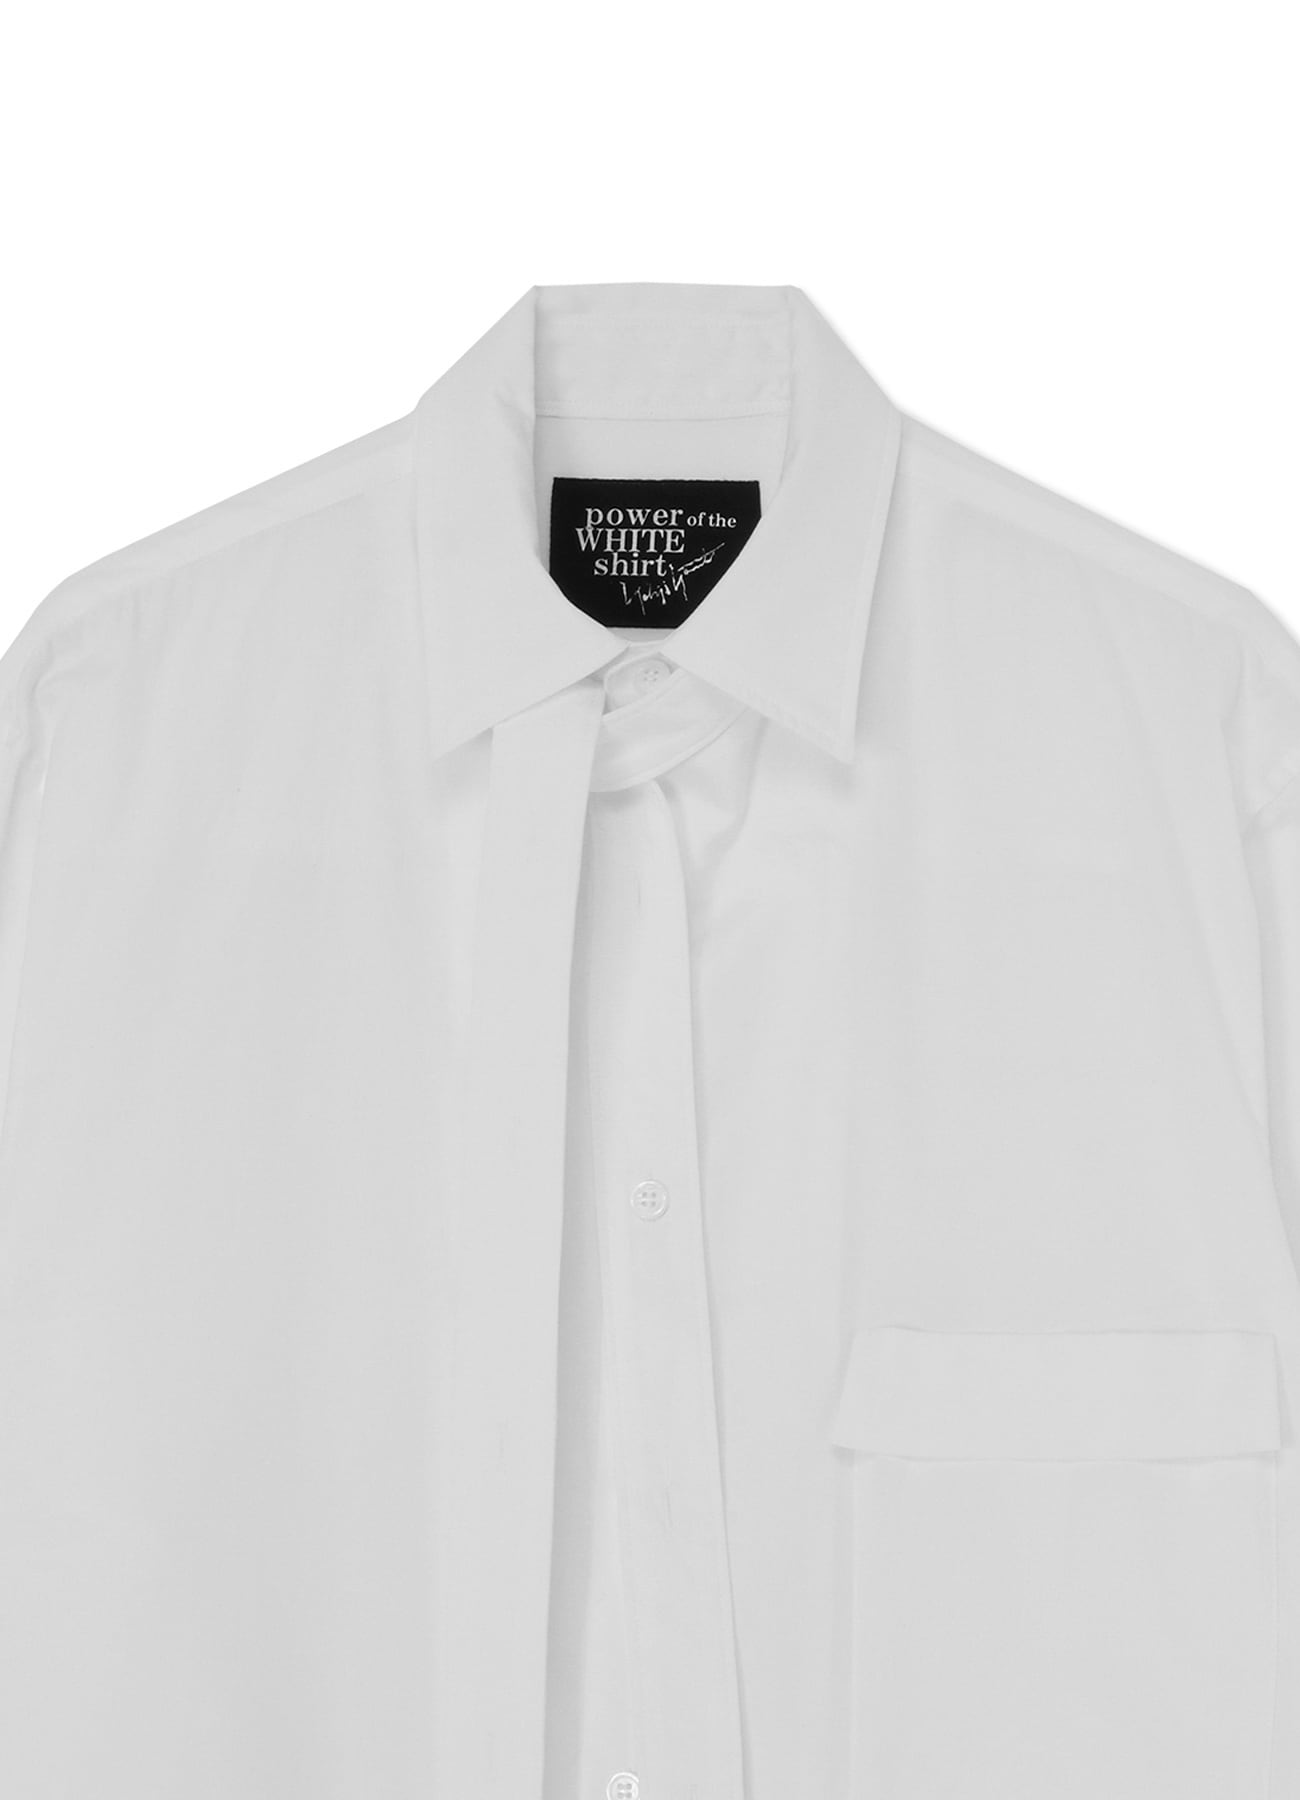 100/2 COTTON BROADCLOTH NECK TIE SHIRT(S White): power of the